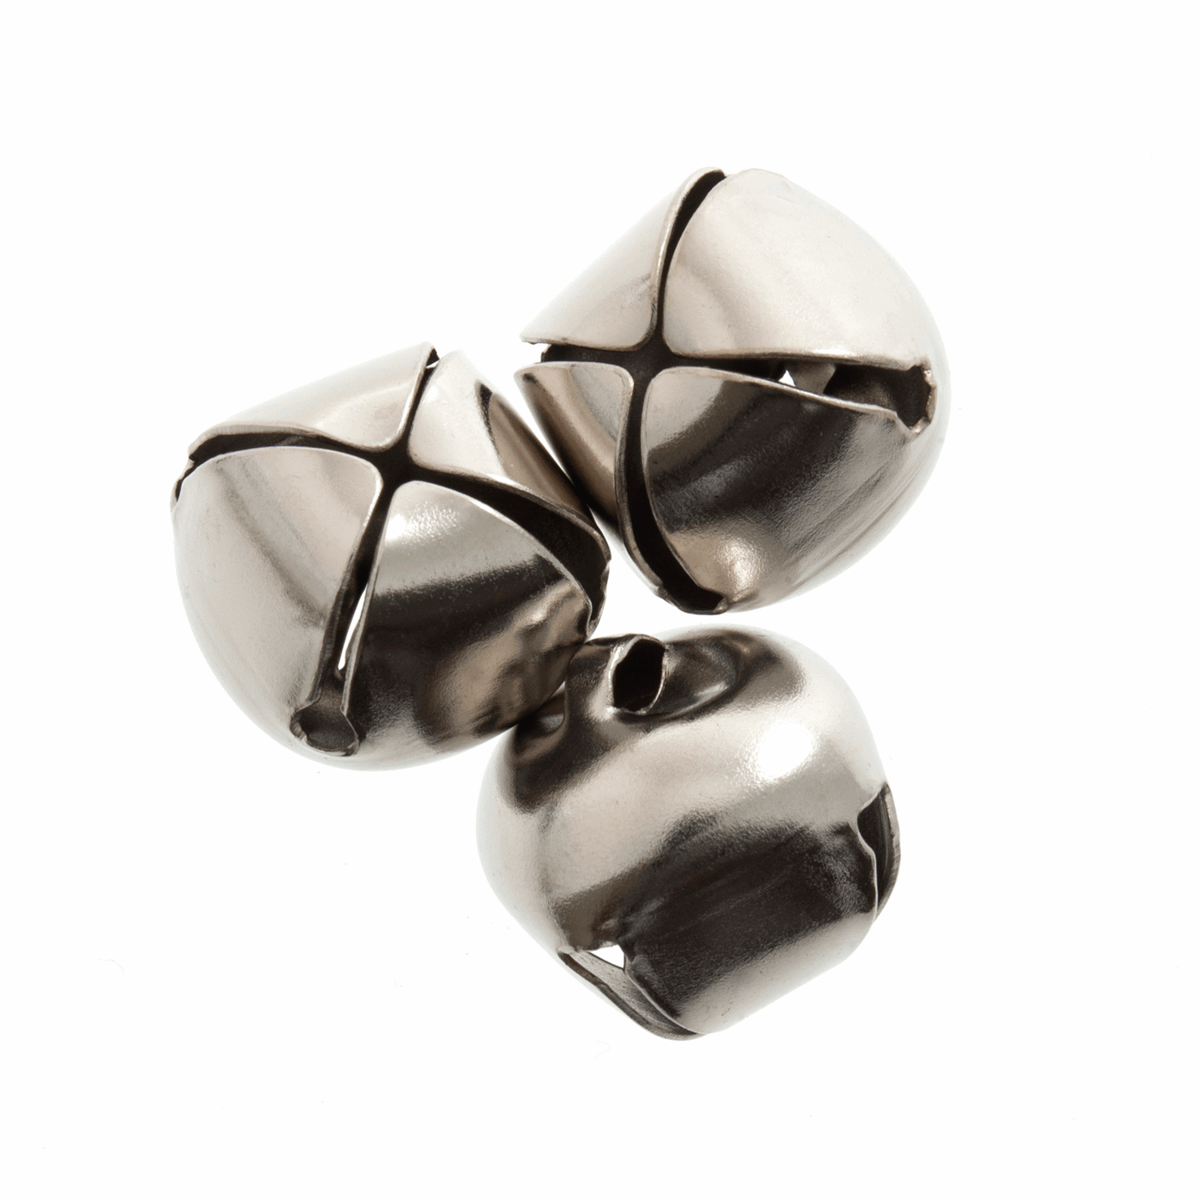 Silver Jingle Bells - 20mm (Pack of 3)